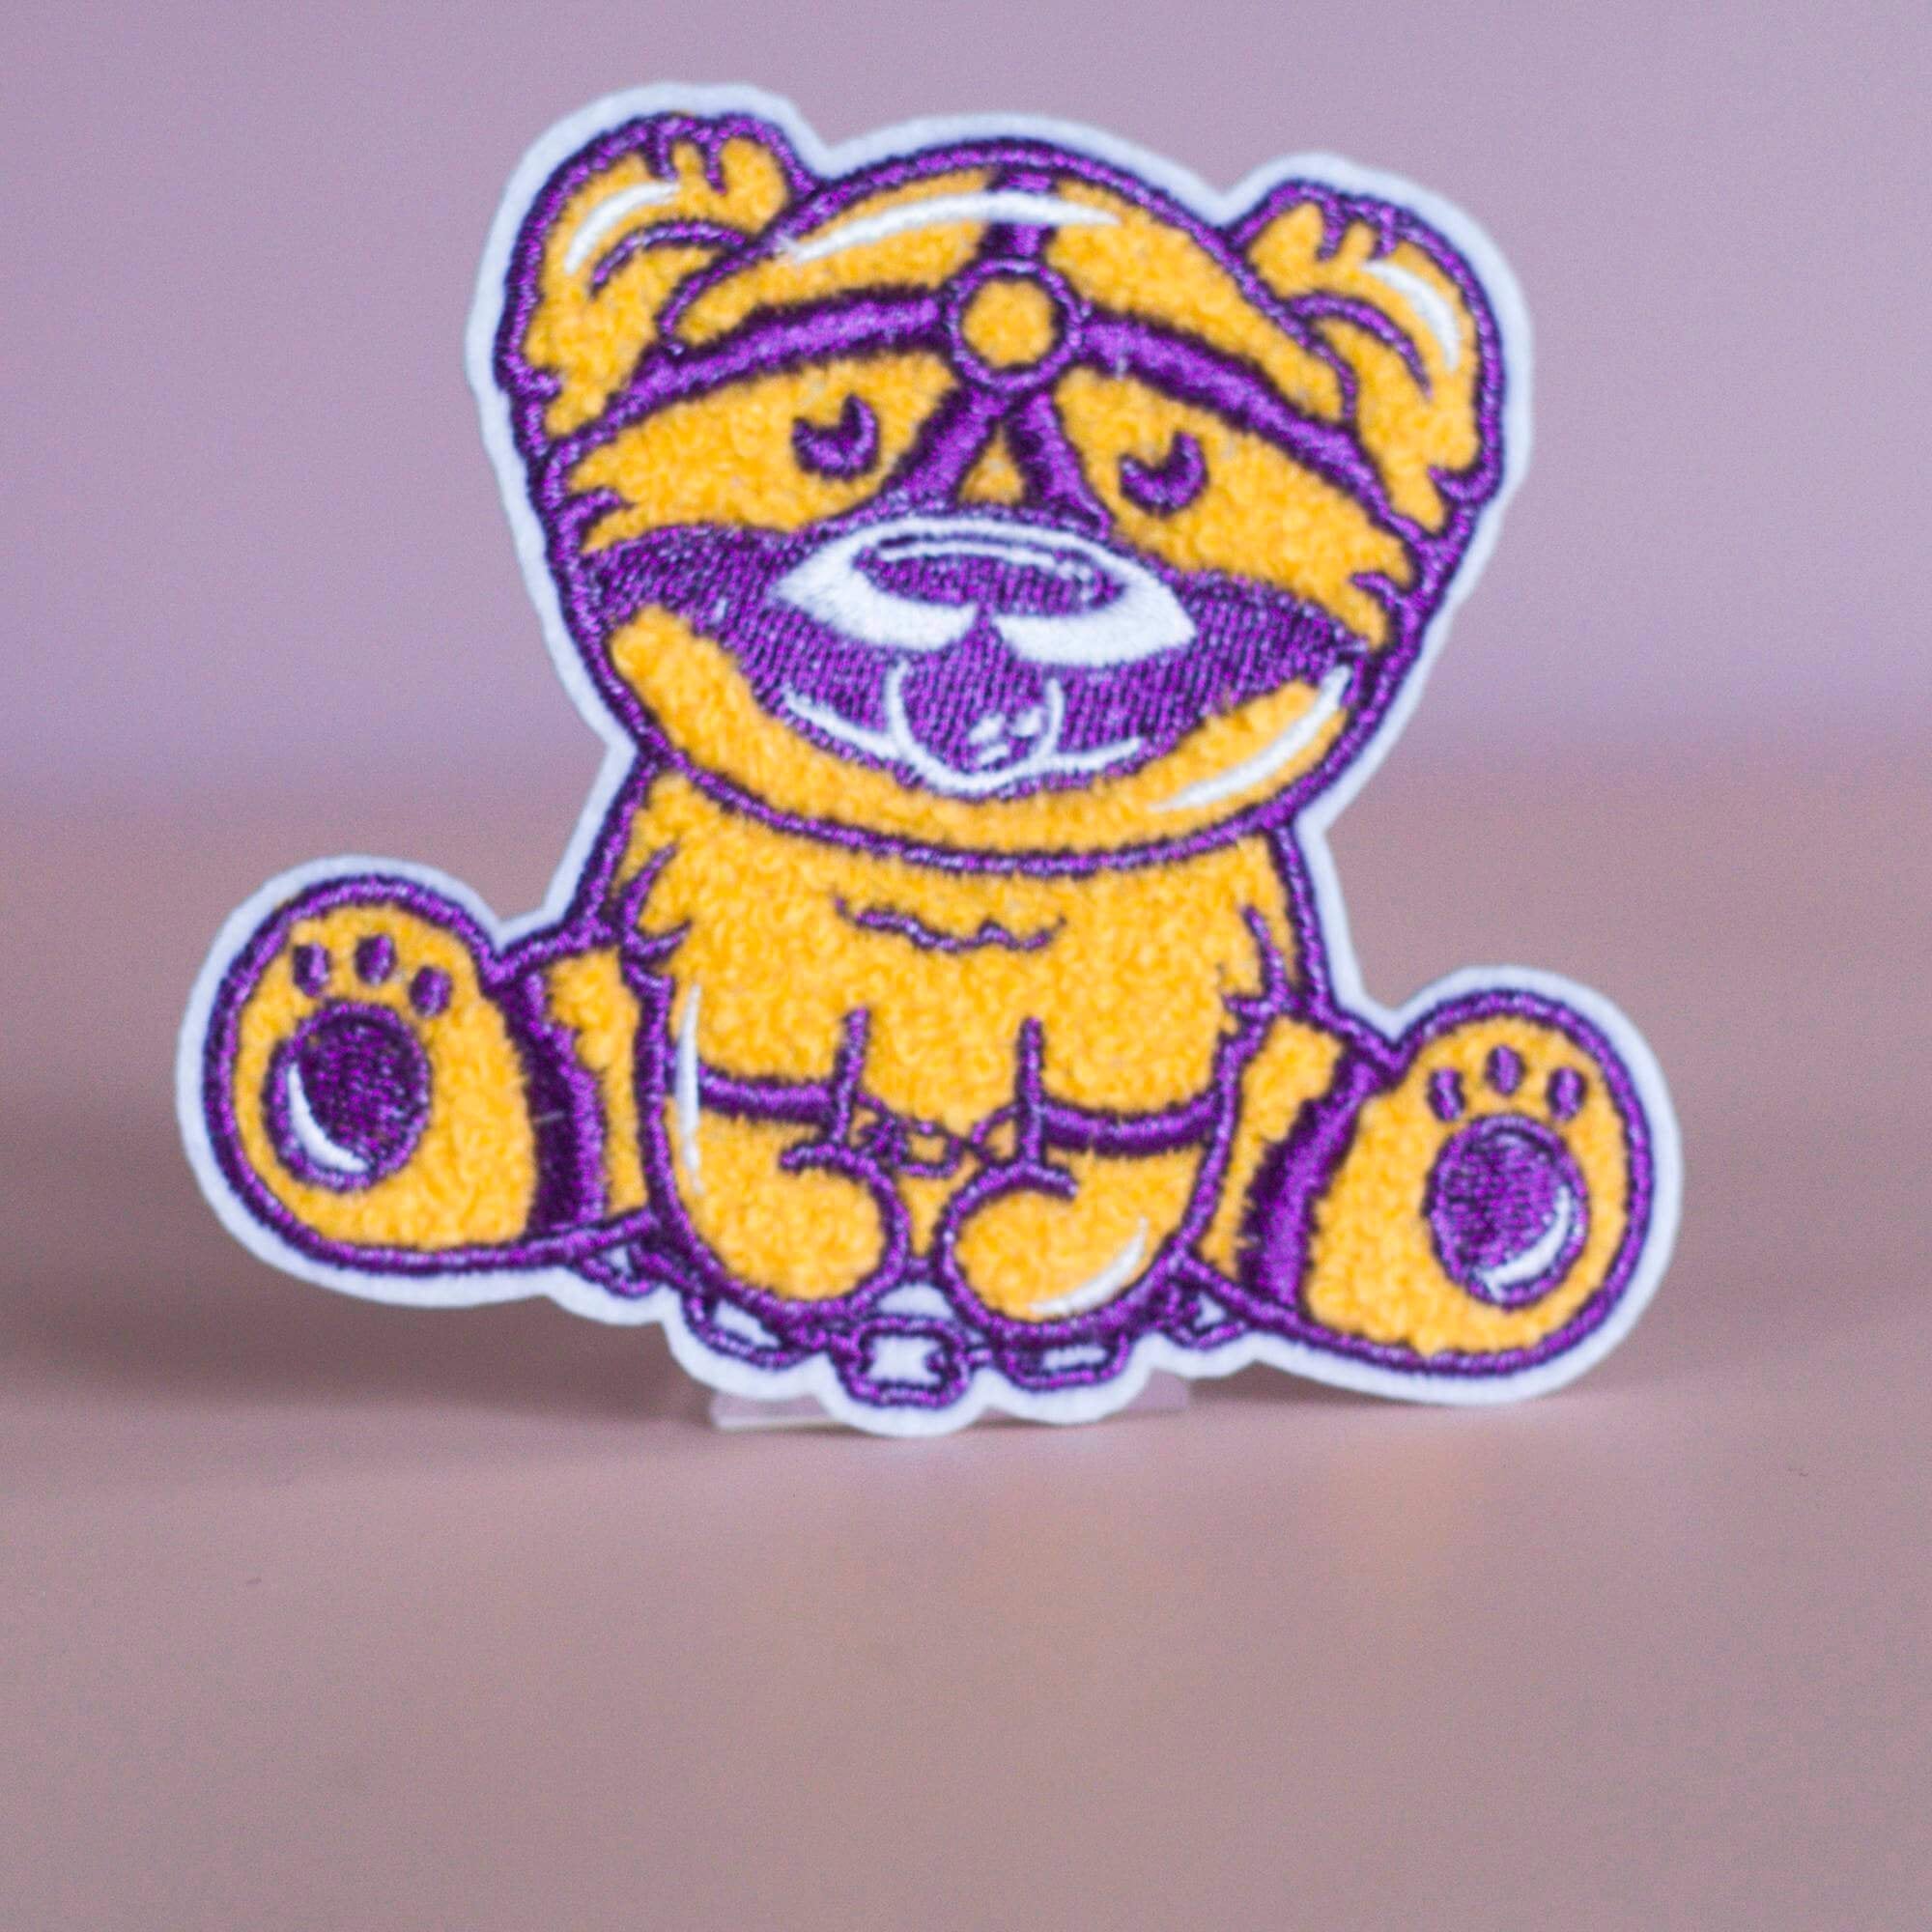 Patch featuring a cute bear in yellow and purple with a playful expression, wearing a BDSM harness and a ball gag. The design is fun and whimsical, combining bold colors with a cheeky style.